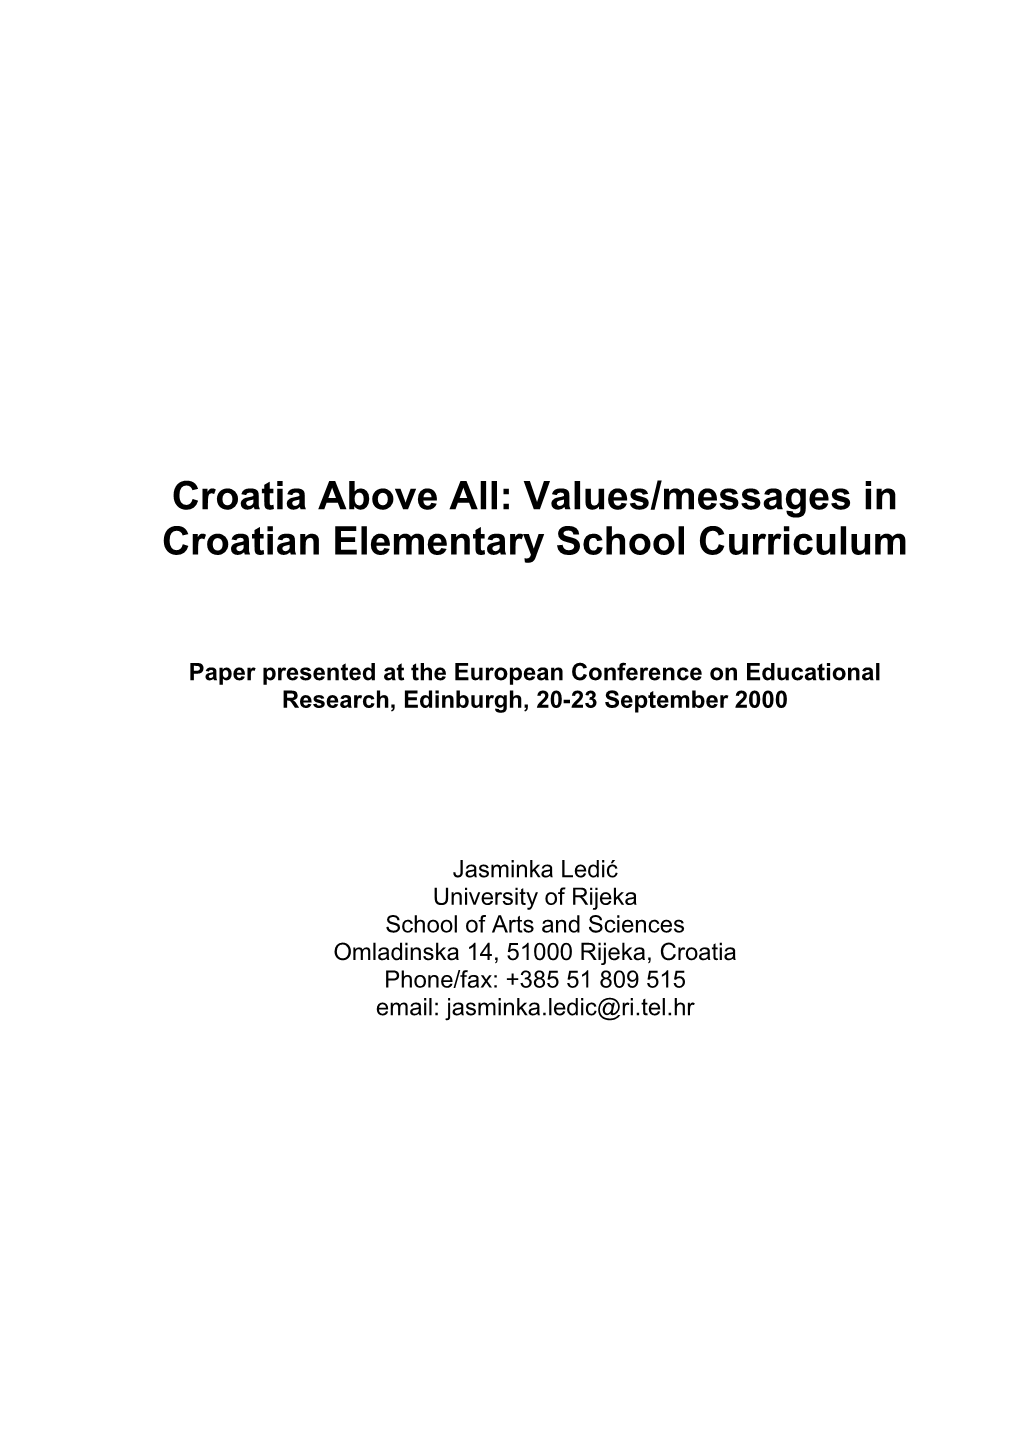 Croatia Above All: Values/Messages in Croatian Elementary School Curriculum